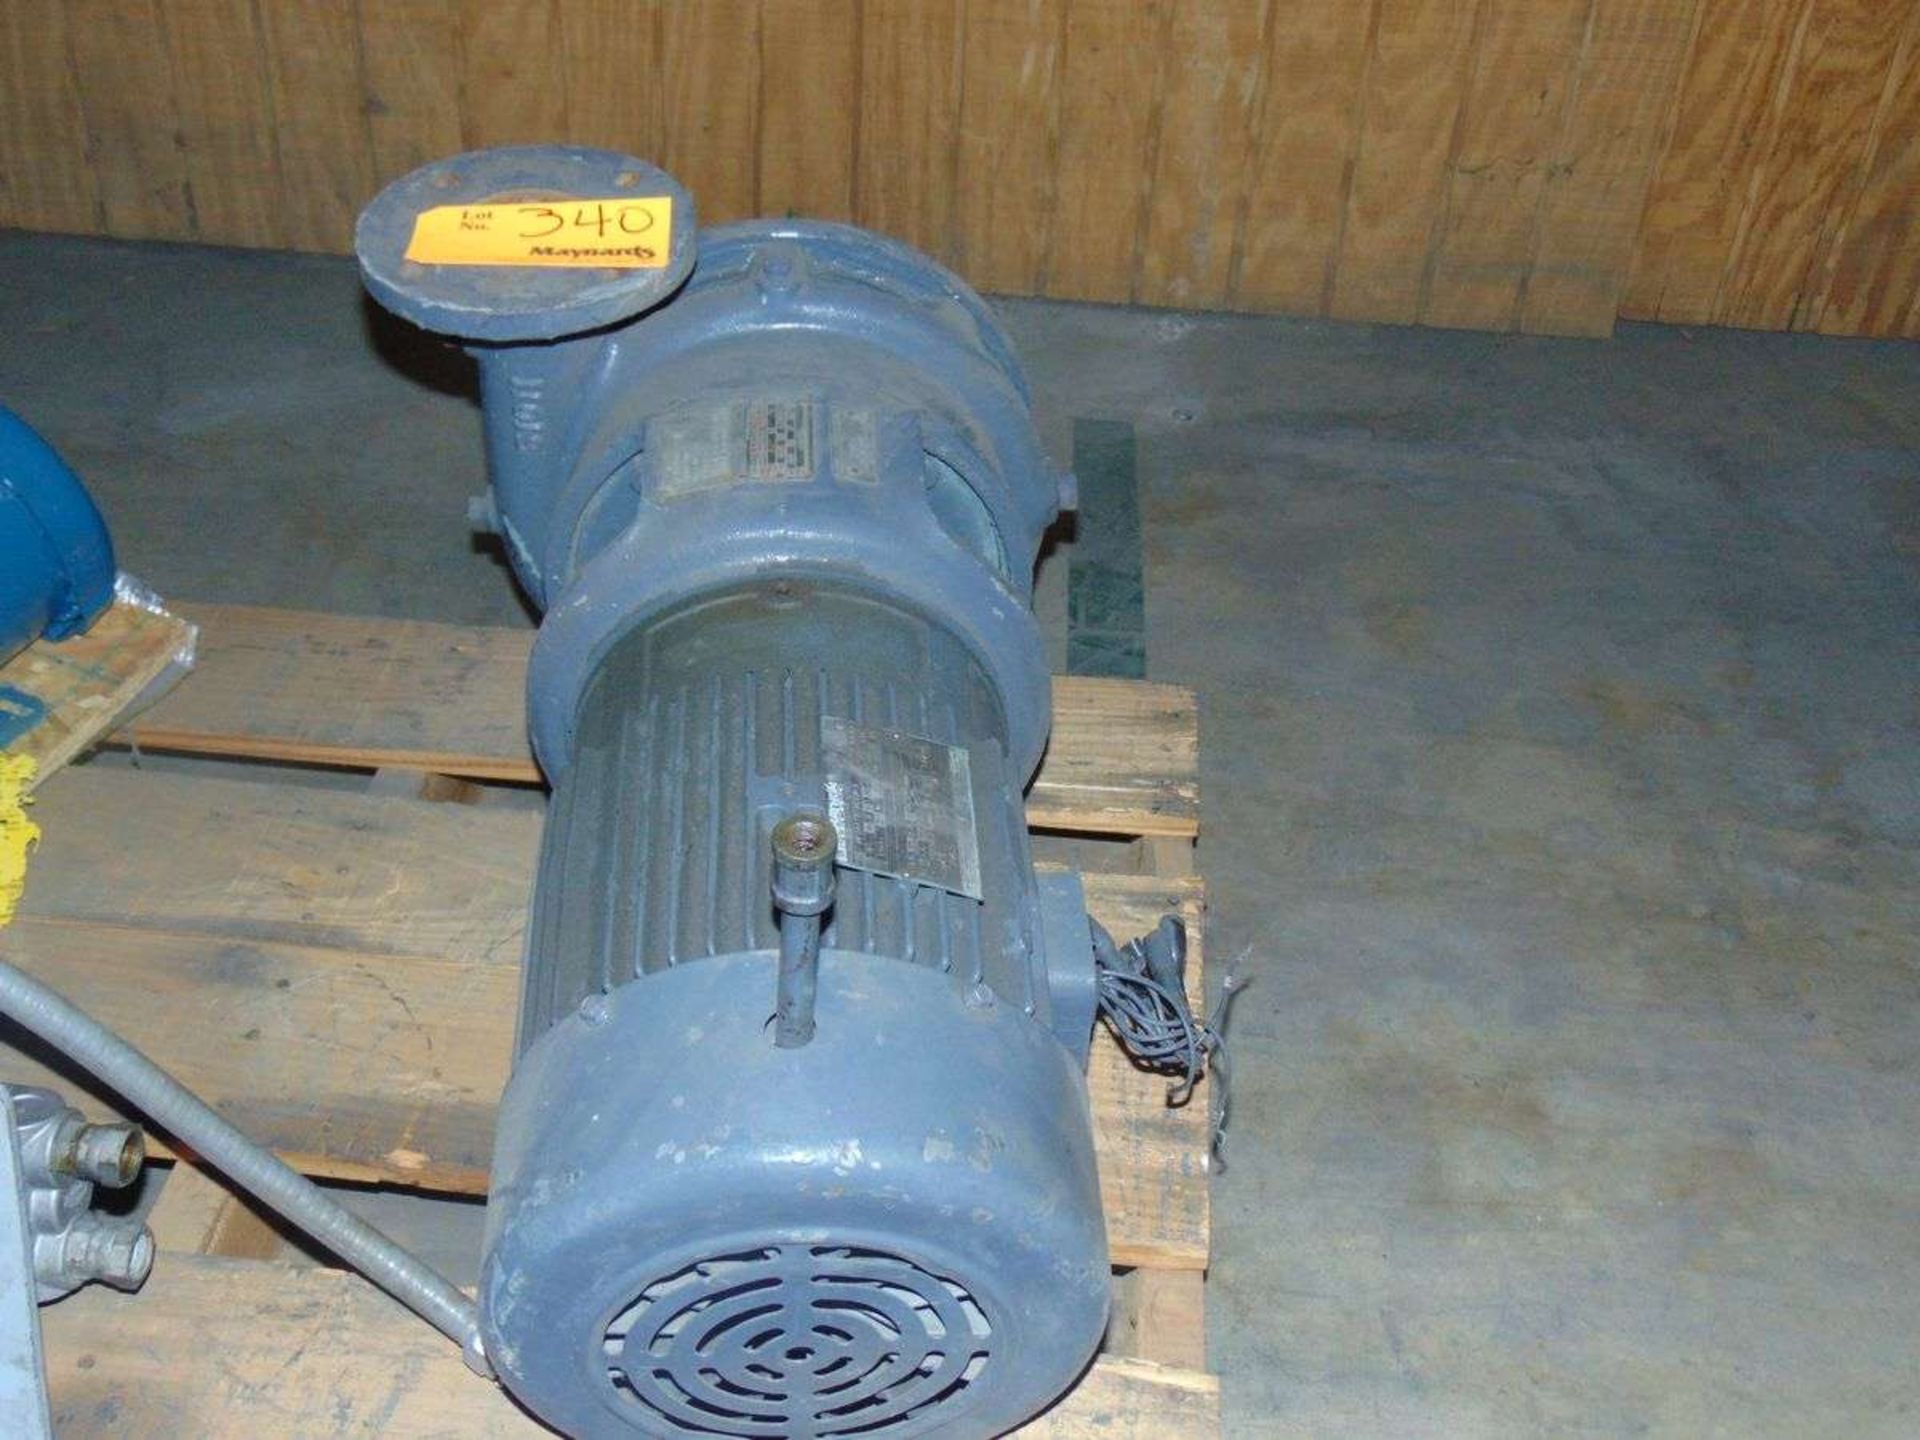 Goulds 3655 Centrifugal Pump - Image 2 of 5